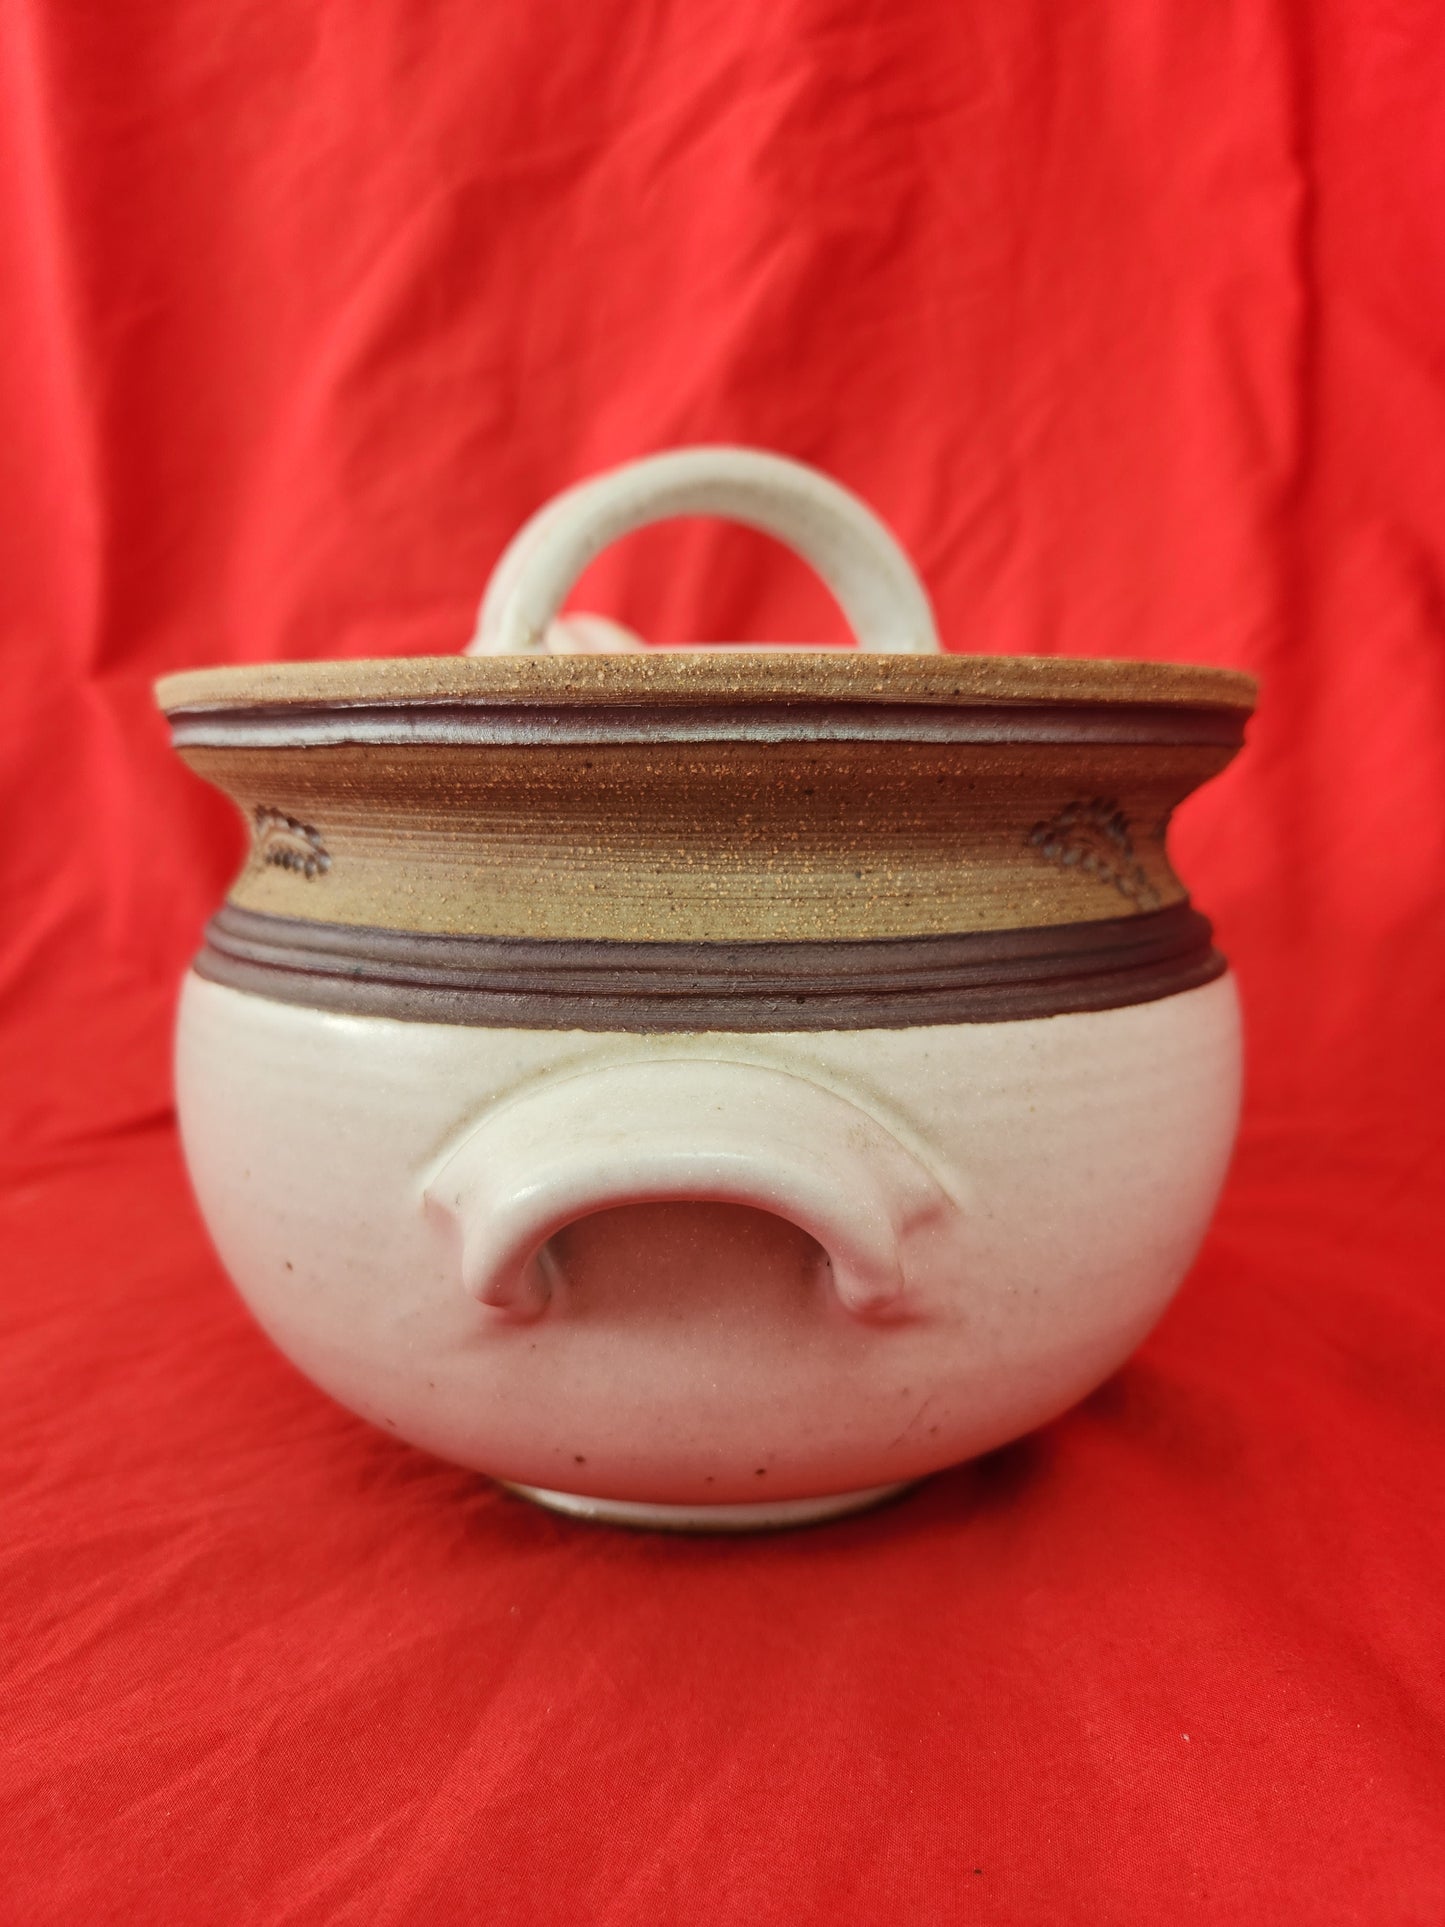 Amazing - Studio Art Pottery White and Brown Stoneware Pot w/Lid & Ladle - signed by Artist